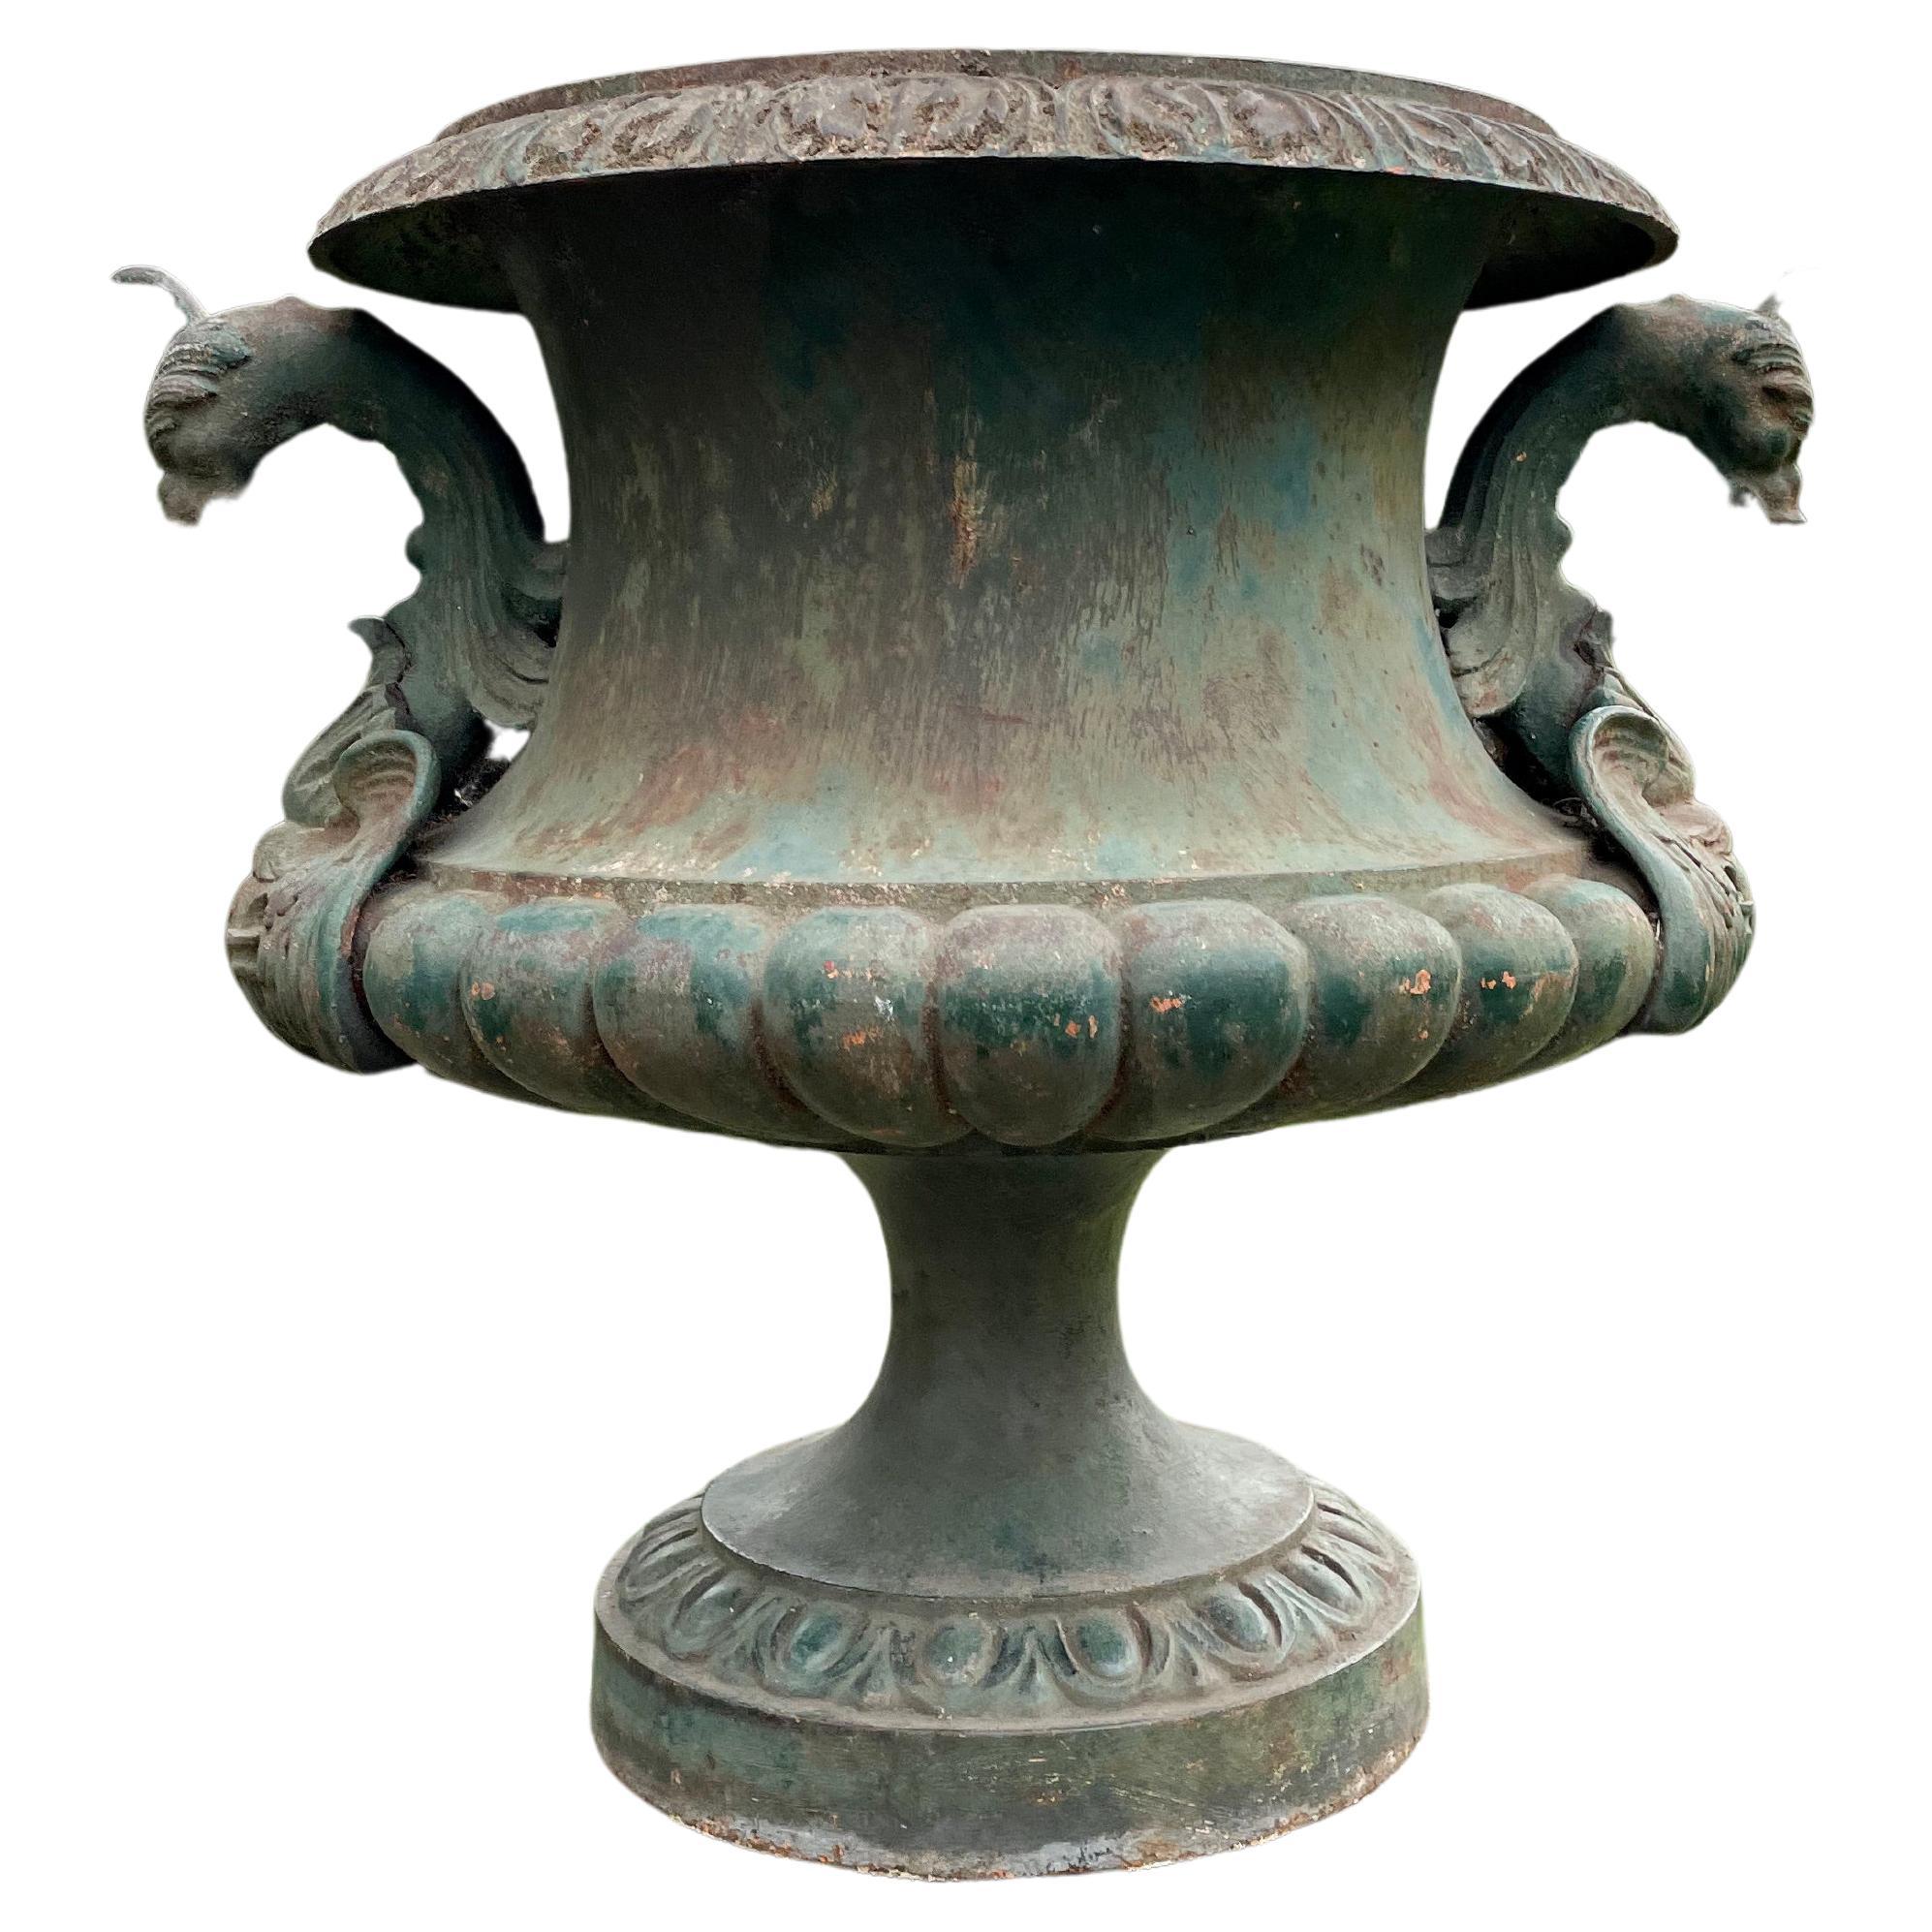 We are great fans of Alfred Corneau urns and this is a stunner! In luscious original and faded blue/green paint and with prominent griffin handles, a demi-lobed body and decorated rim and foot, it is in perfect antique condition. Large enough to